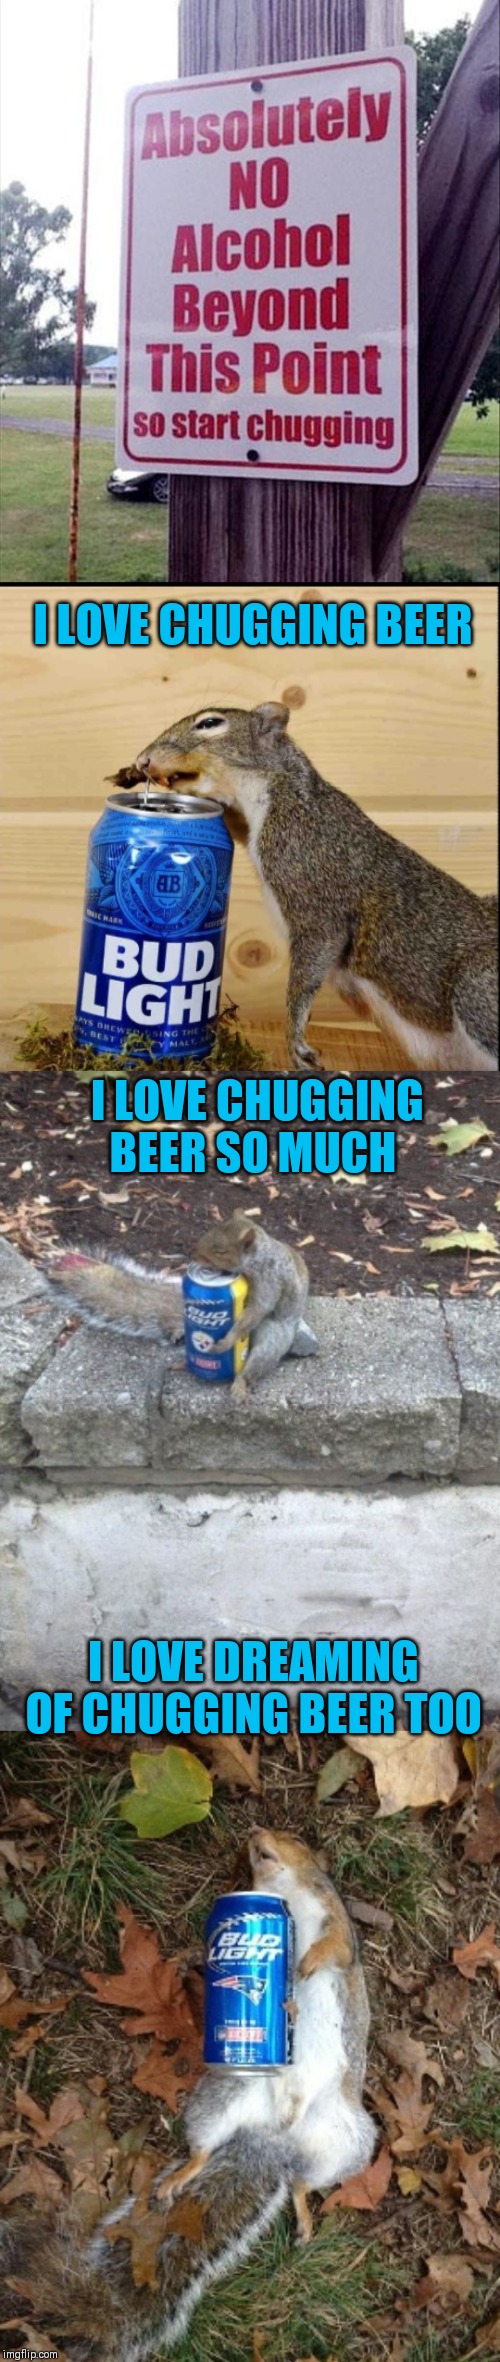 And eating beer nuts | I LOVE CHUGGING BEER; I LOVE CHUGGING BEER SO MUCH; I LOVE DREAMING OF CHUGGING BEER TOO | image tagged in memes,squirrel,44colt,beer,budlight squirrel,funny signs | made w/ Imgflip meme maker